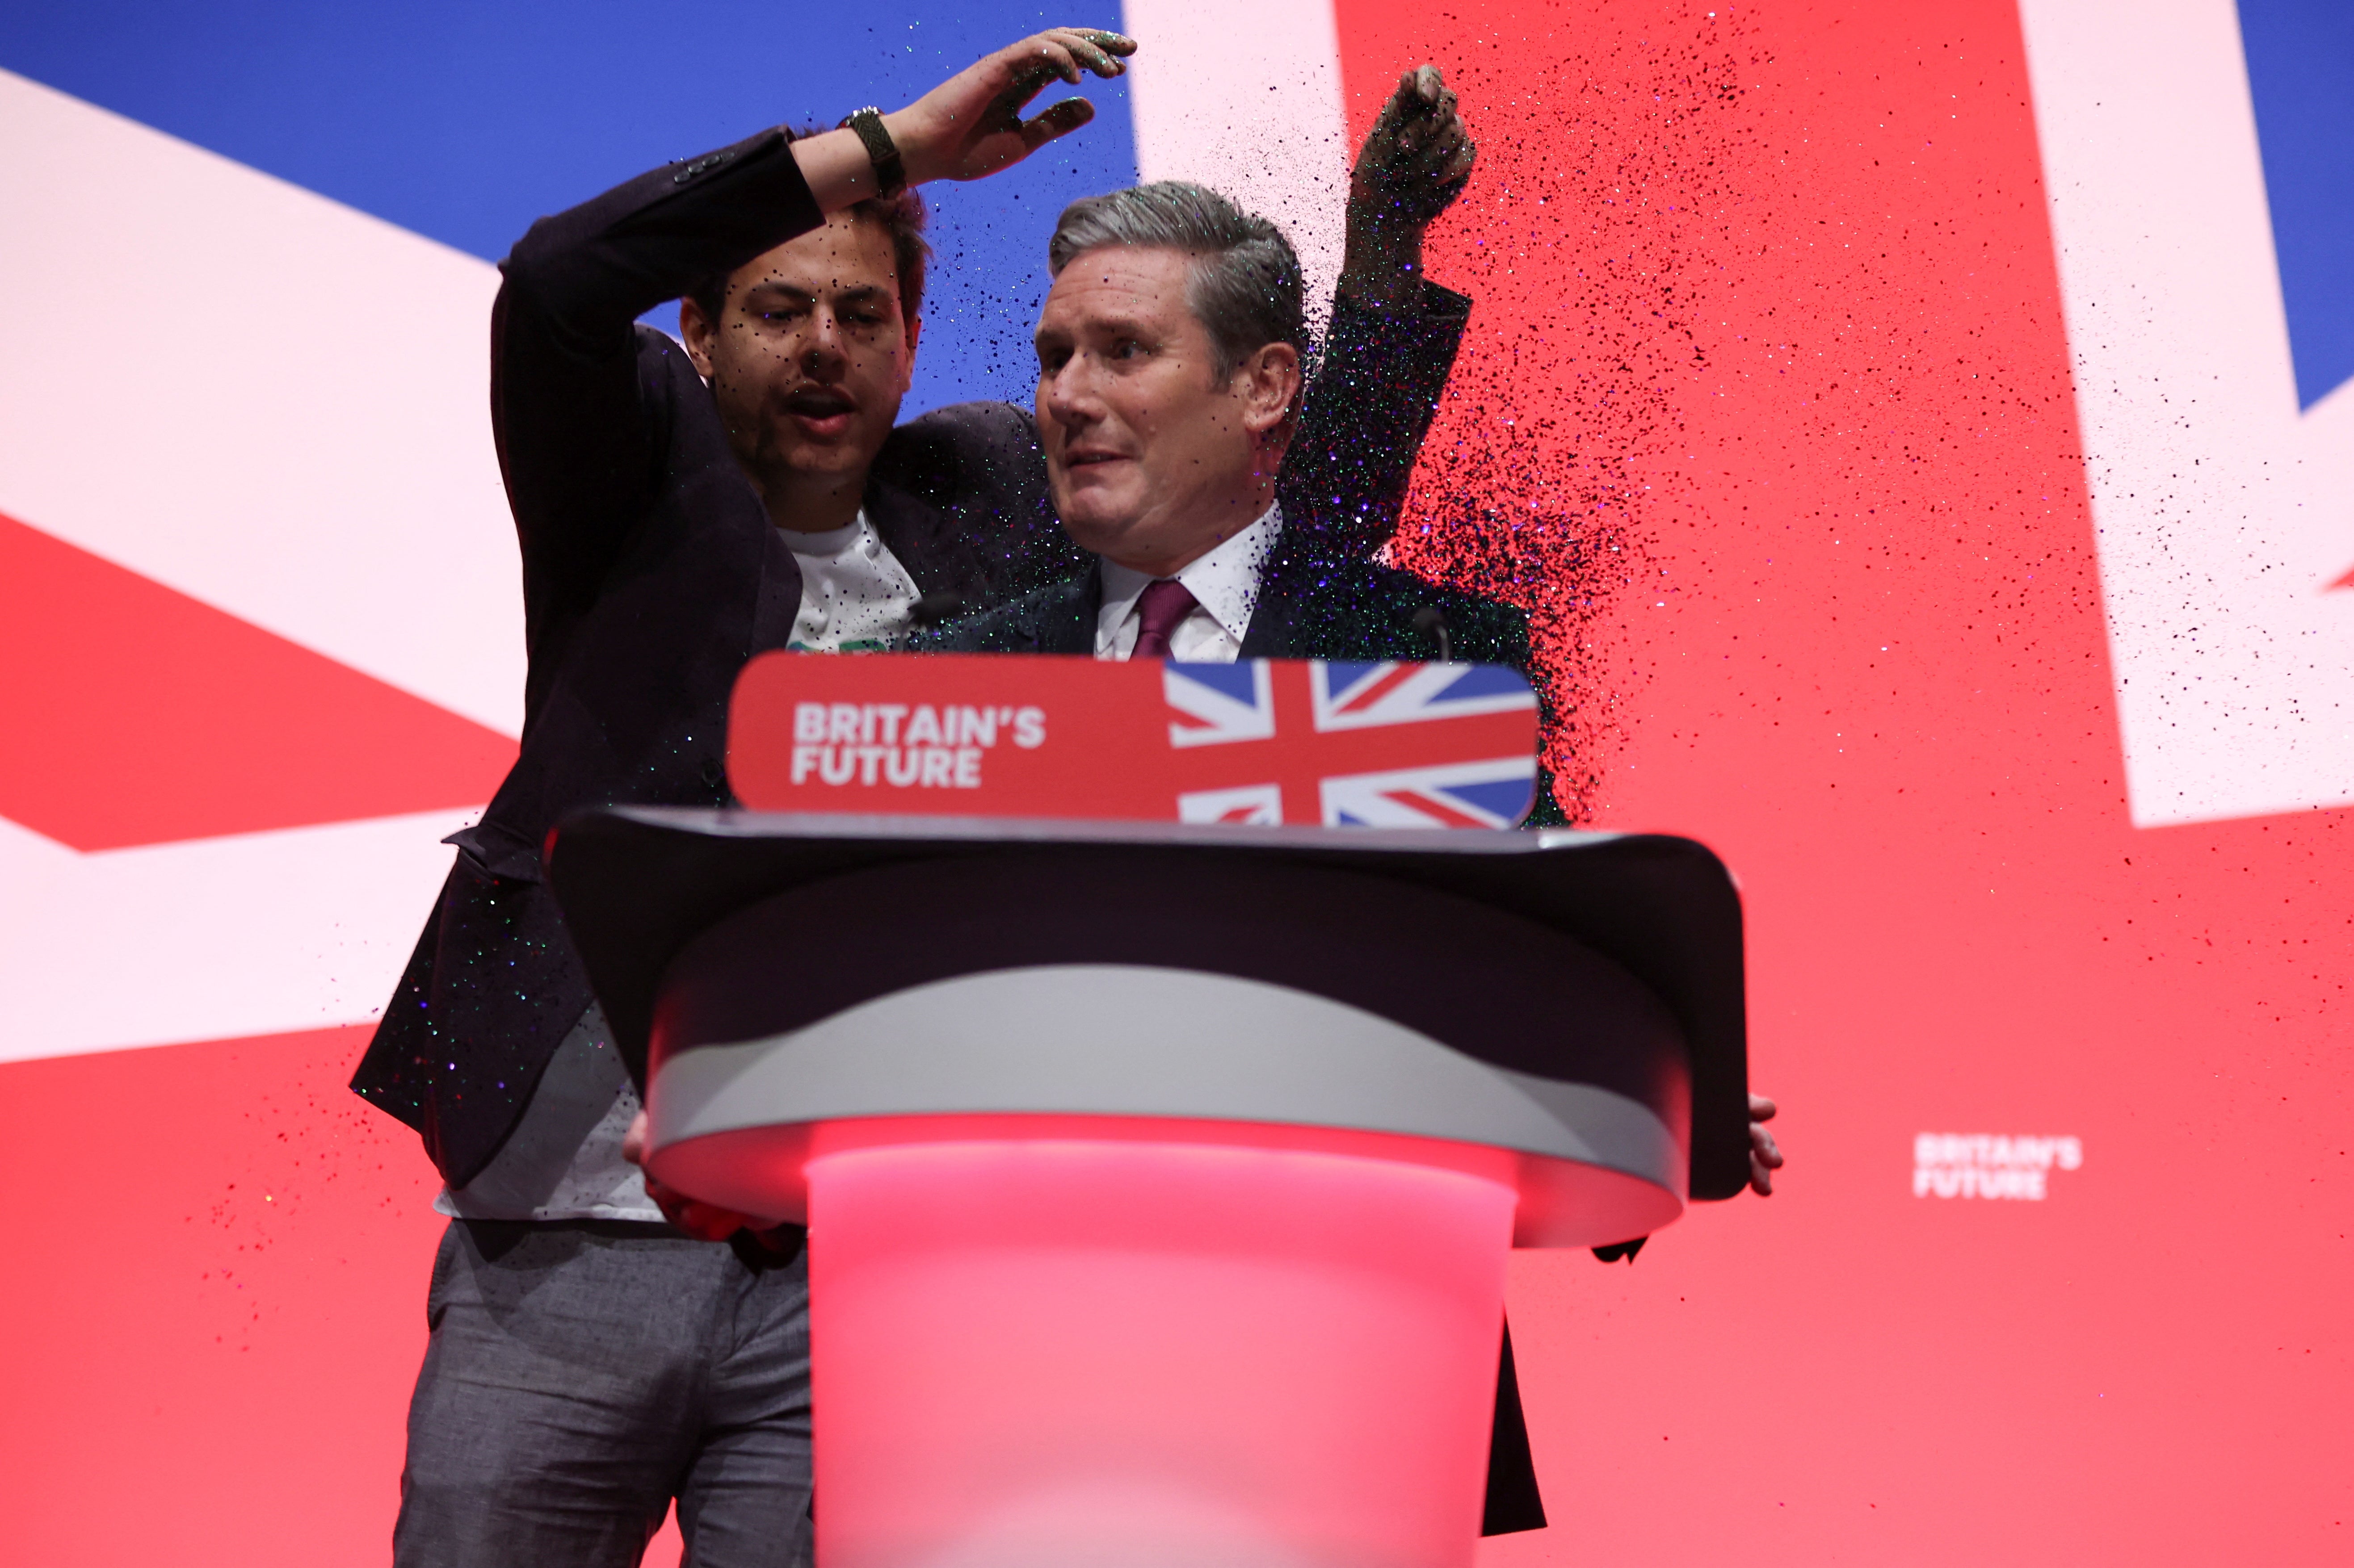 Sir Keir Starmer was doused in glitter at the start of his keynote speech